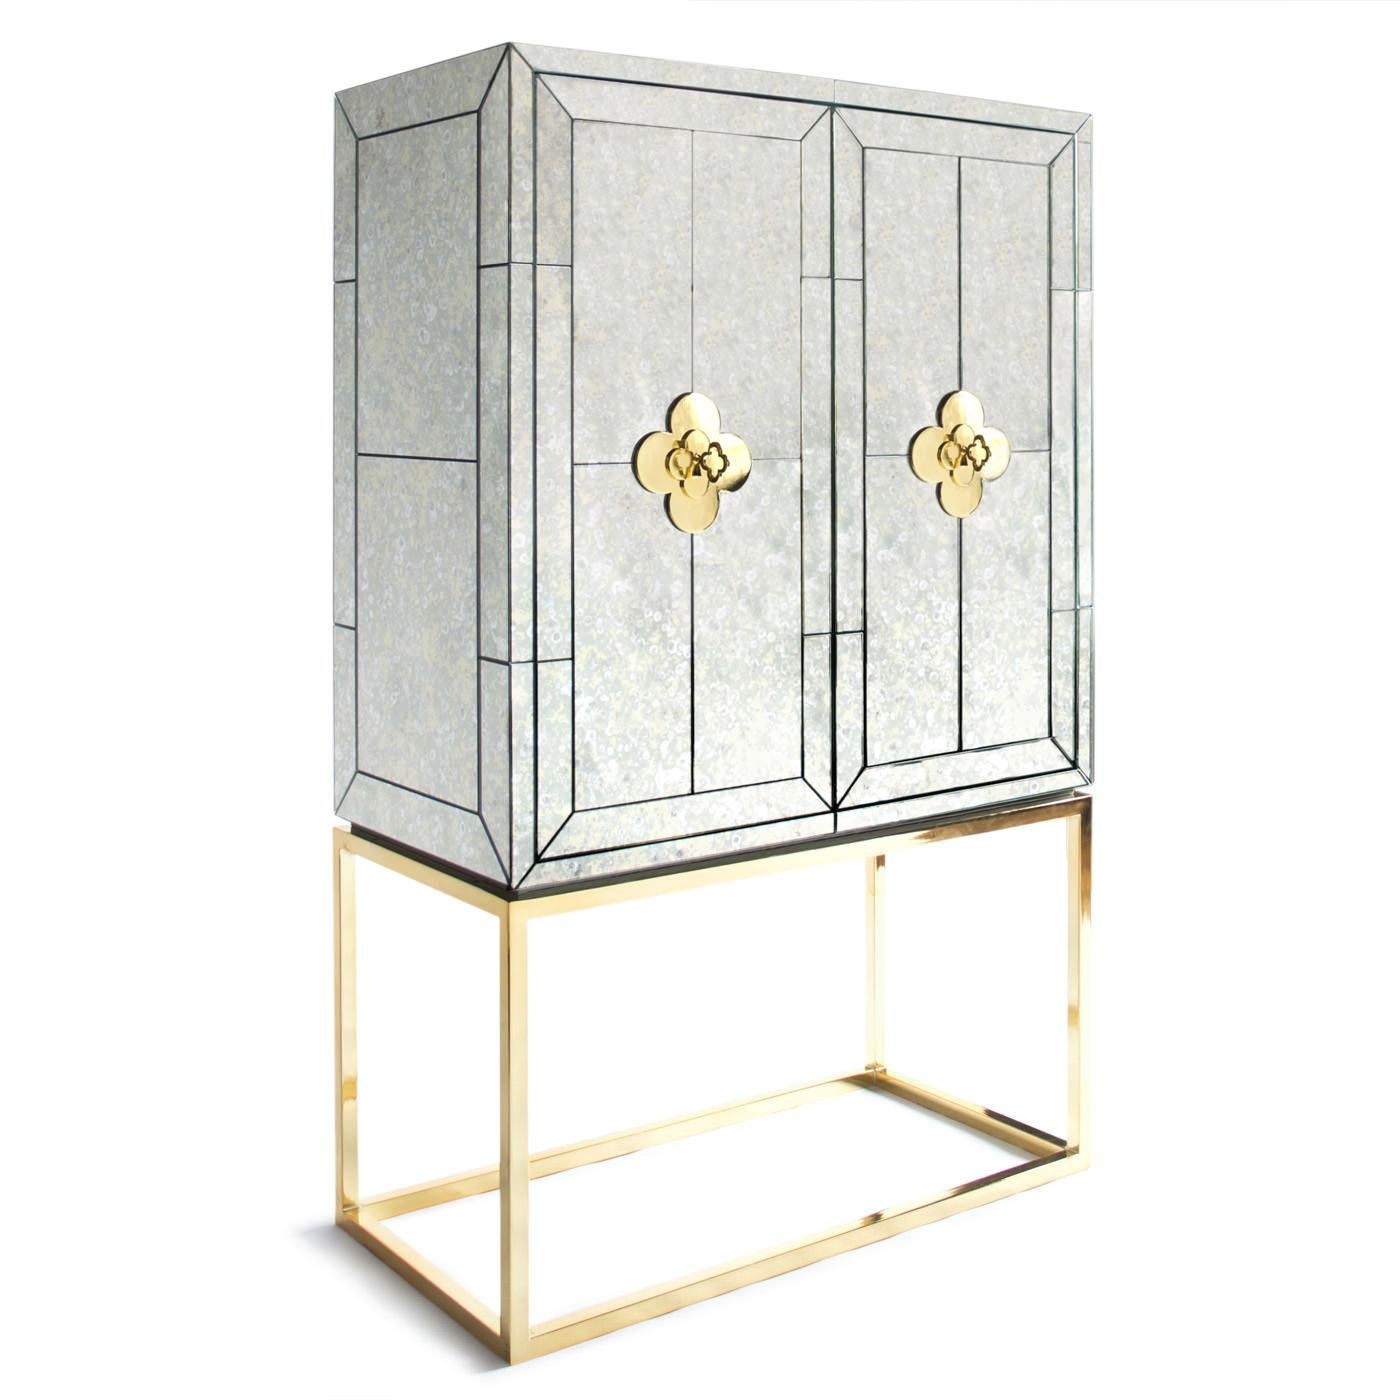 Minimalist forms meet Maximalist glamour. Antiqued mirror with a polished brass base. The robin's egg blue interior is fitted with four adjustable tempered glass shelves, plus six wire-bound drinking glass shelves inside the doors. Two drawers at